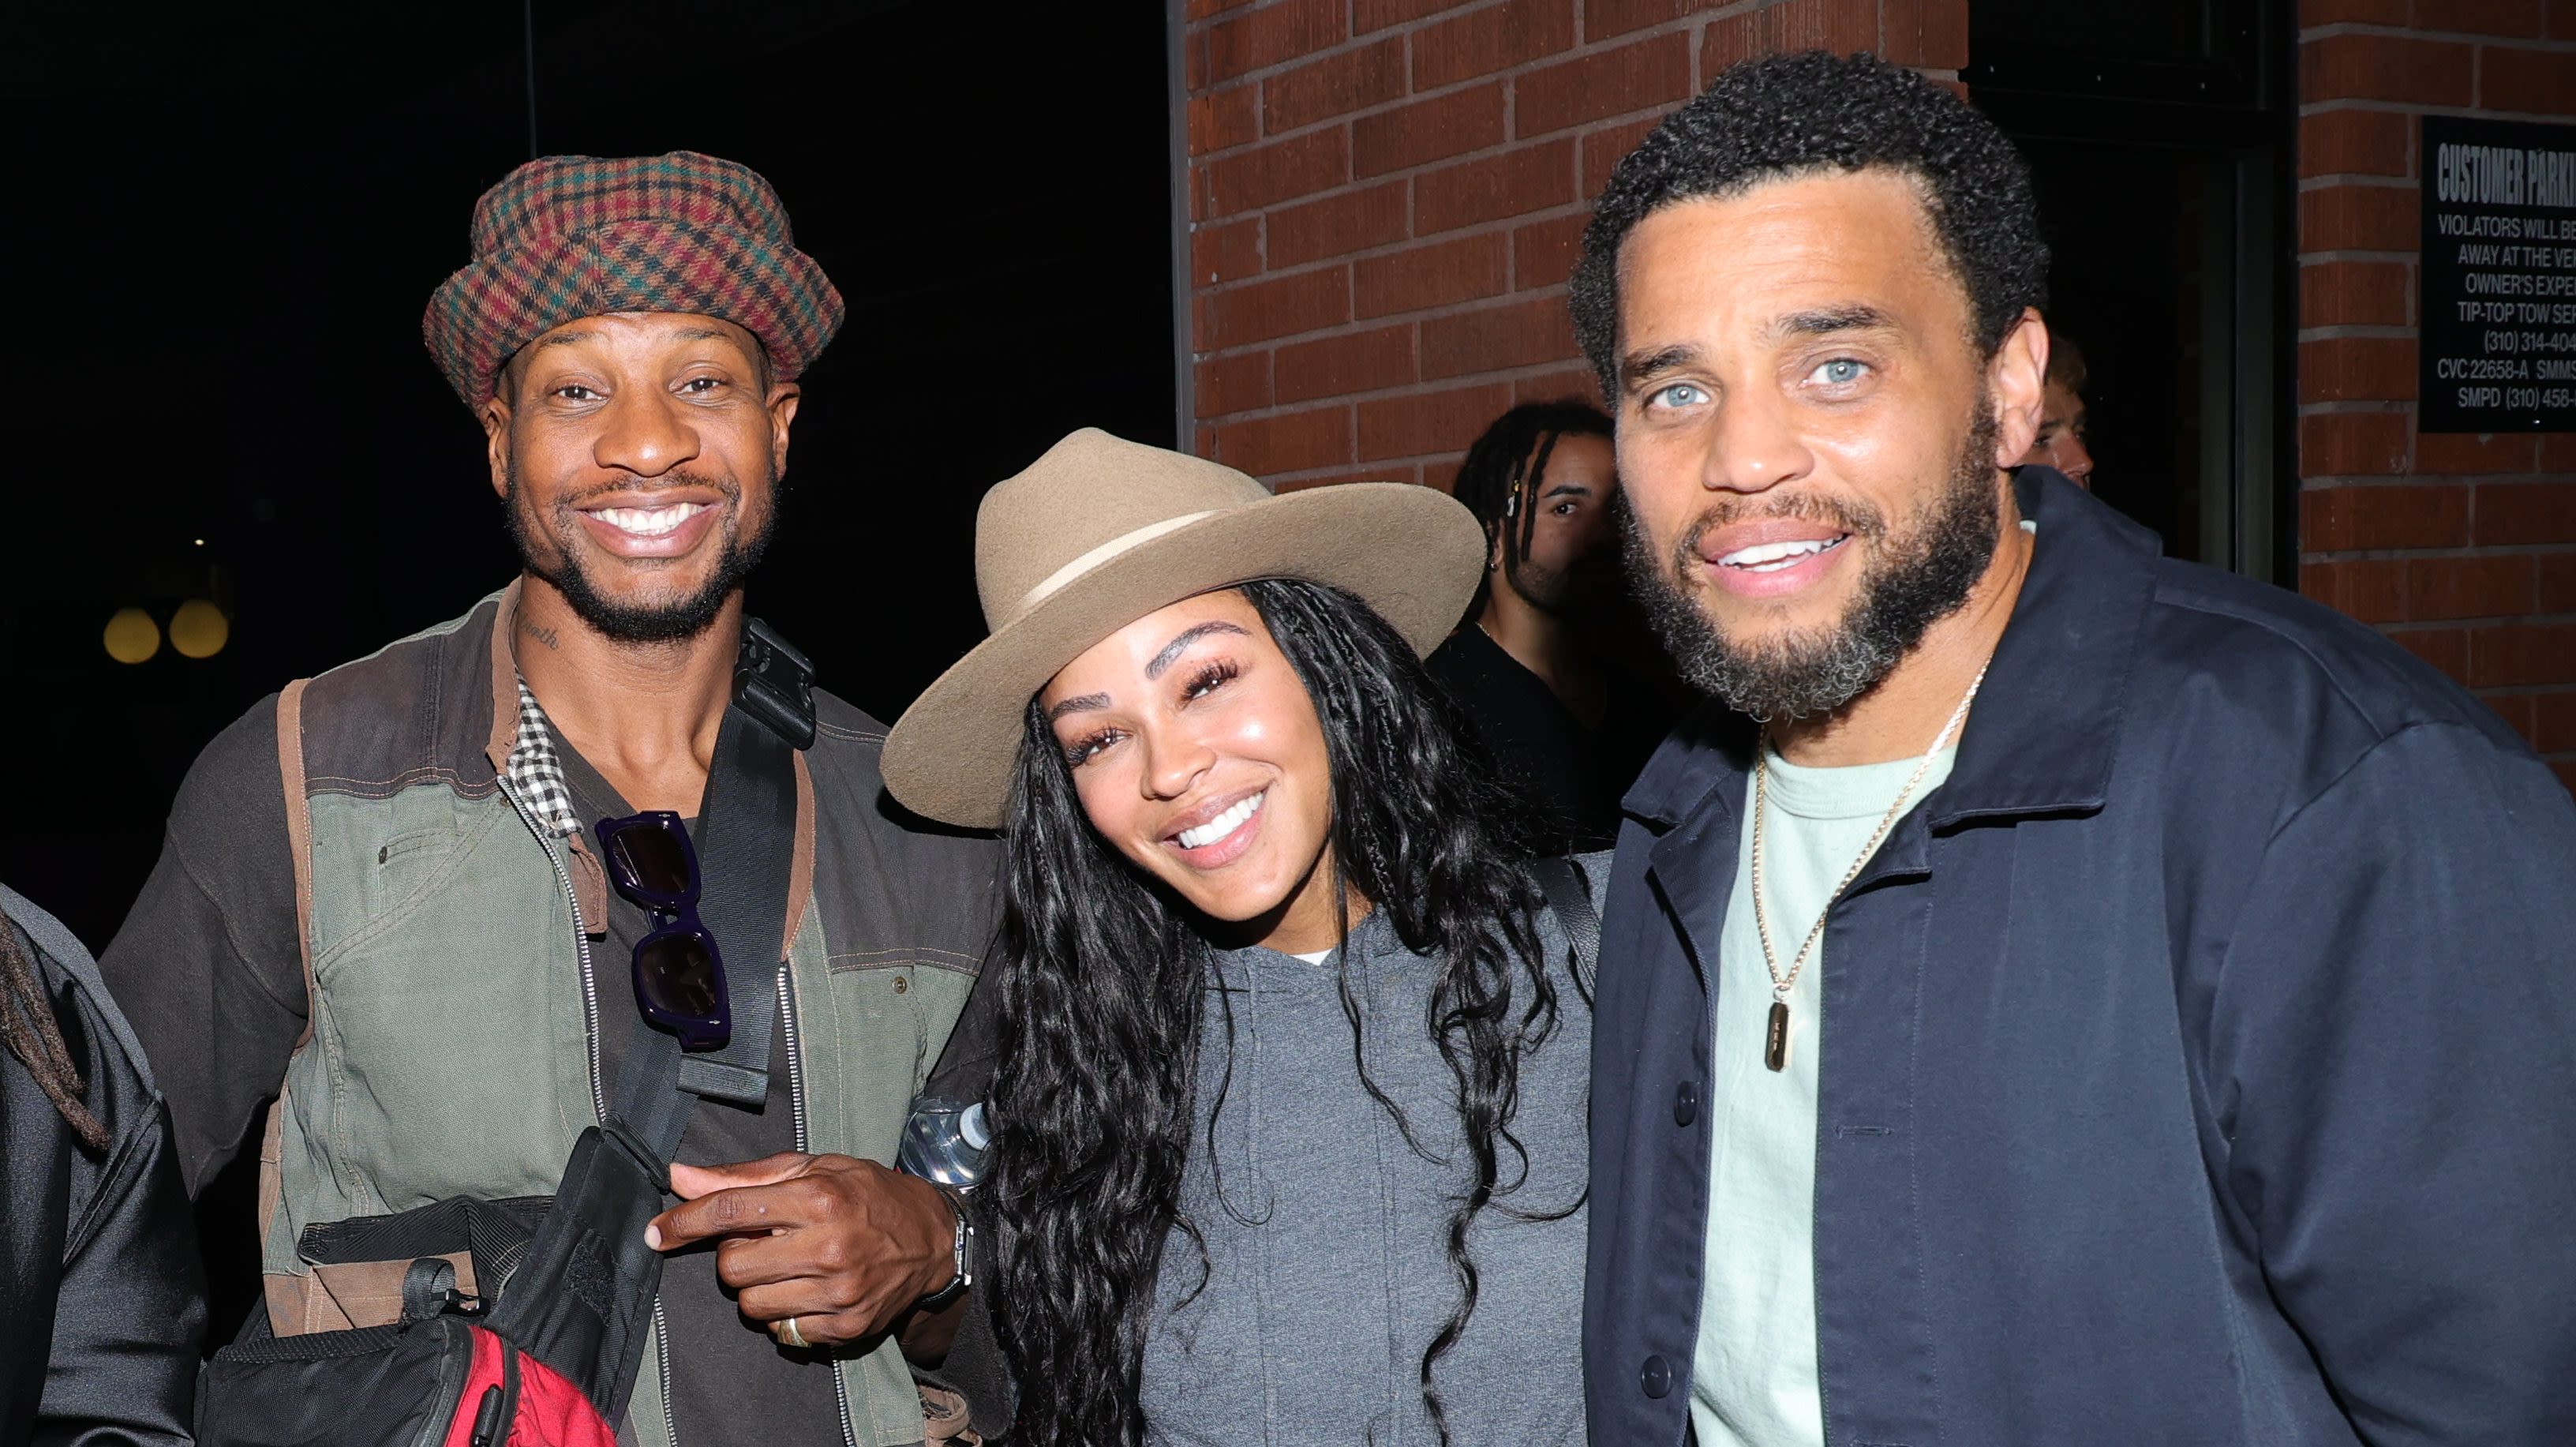 Meagan Good Responds To Michael Ealy Hug Controversy, Claims Viral Video Was Doctored